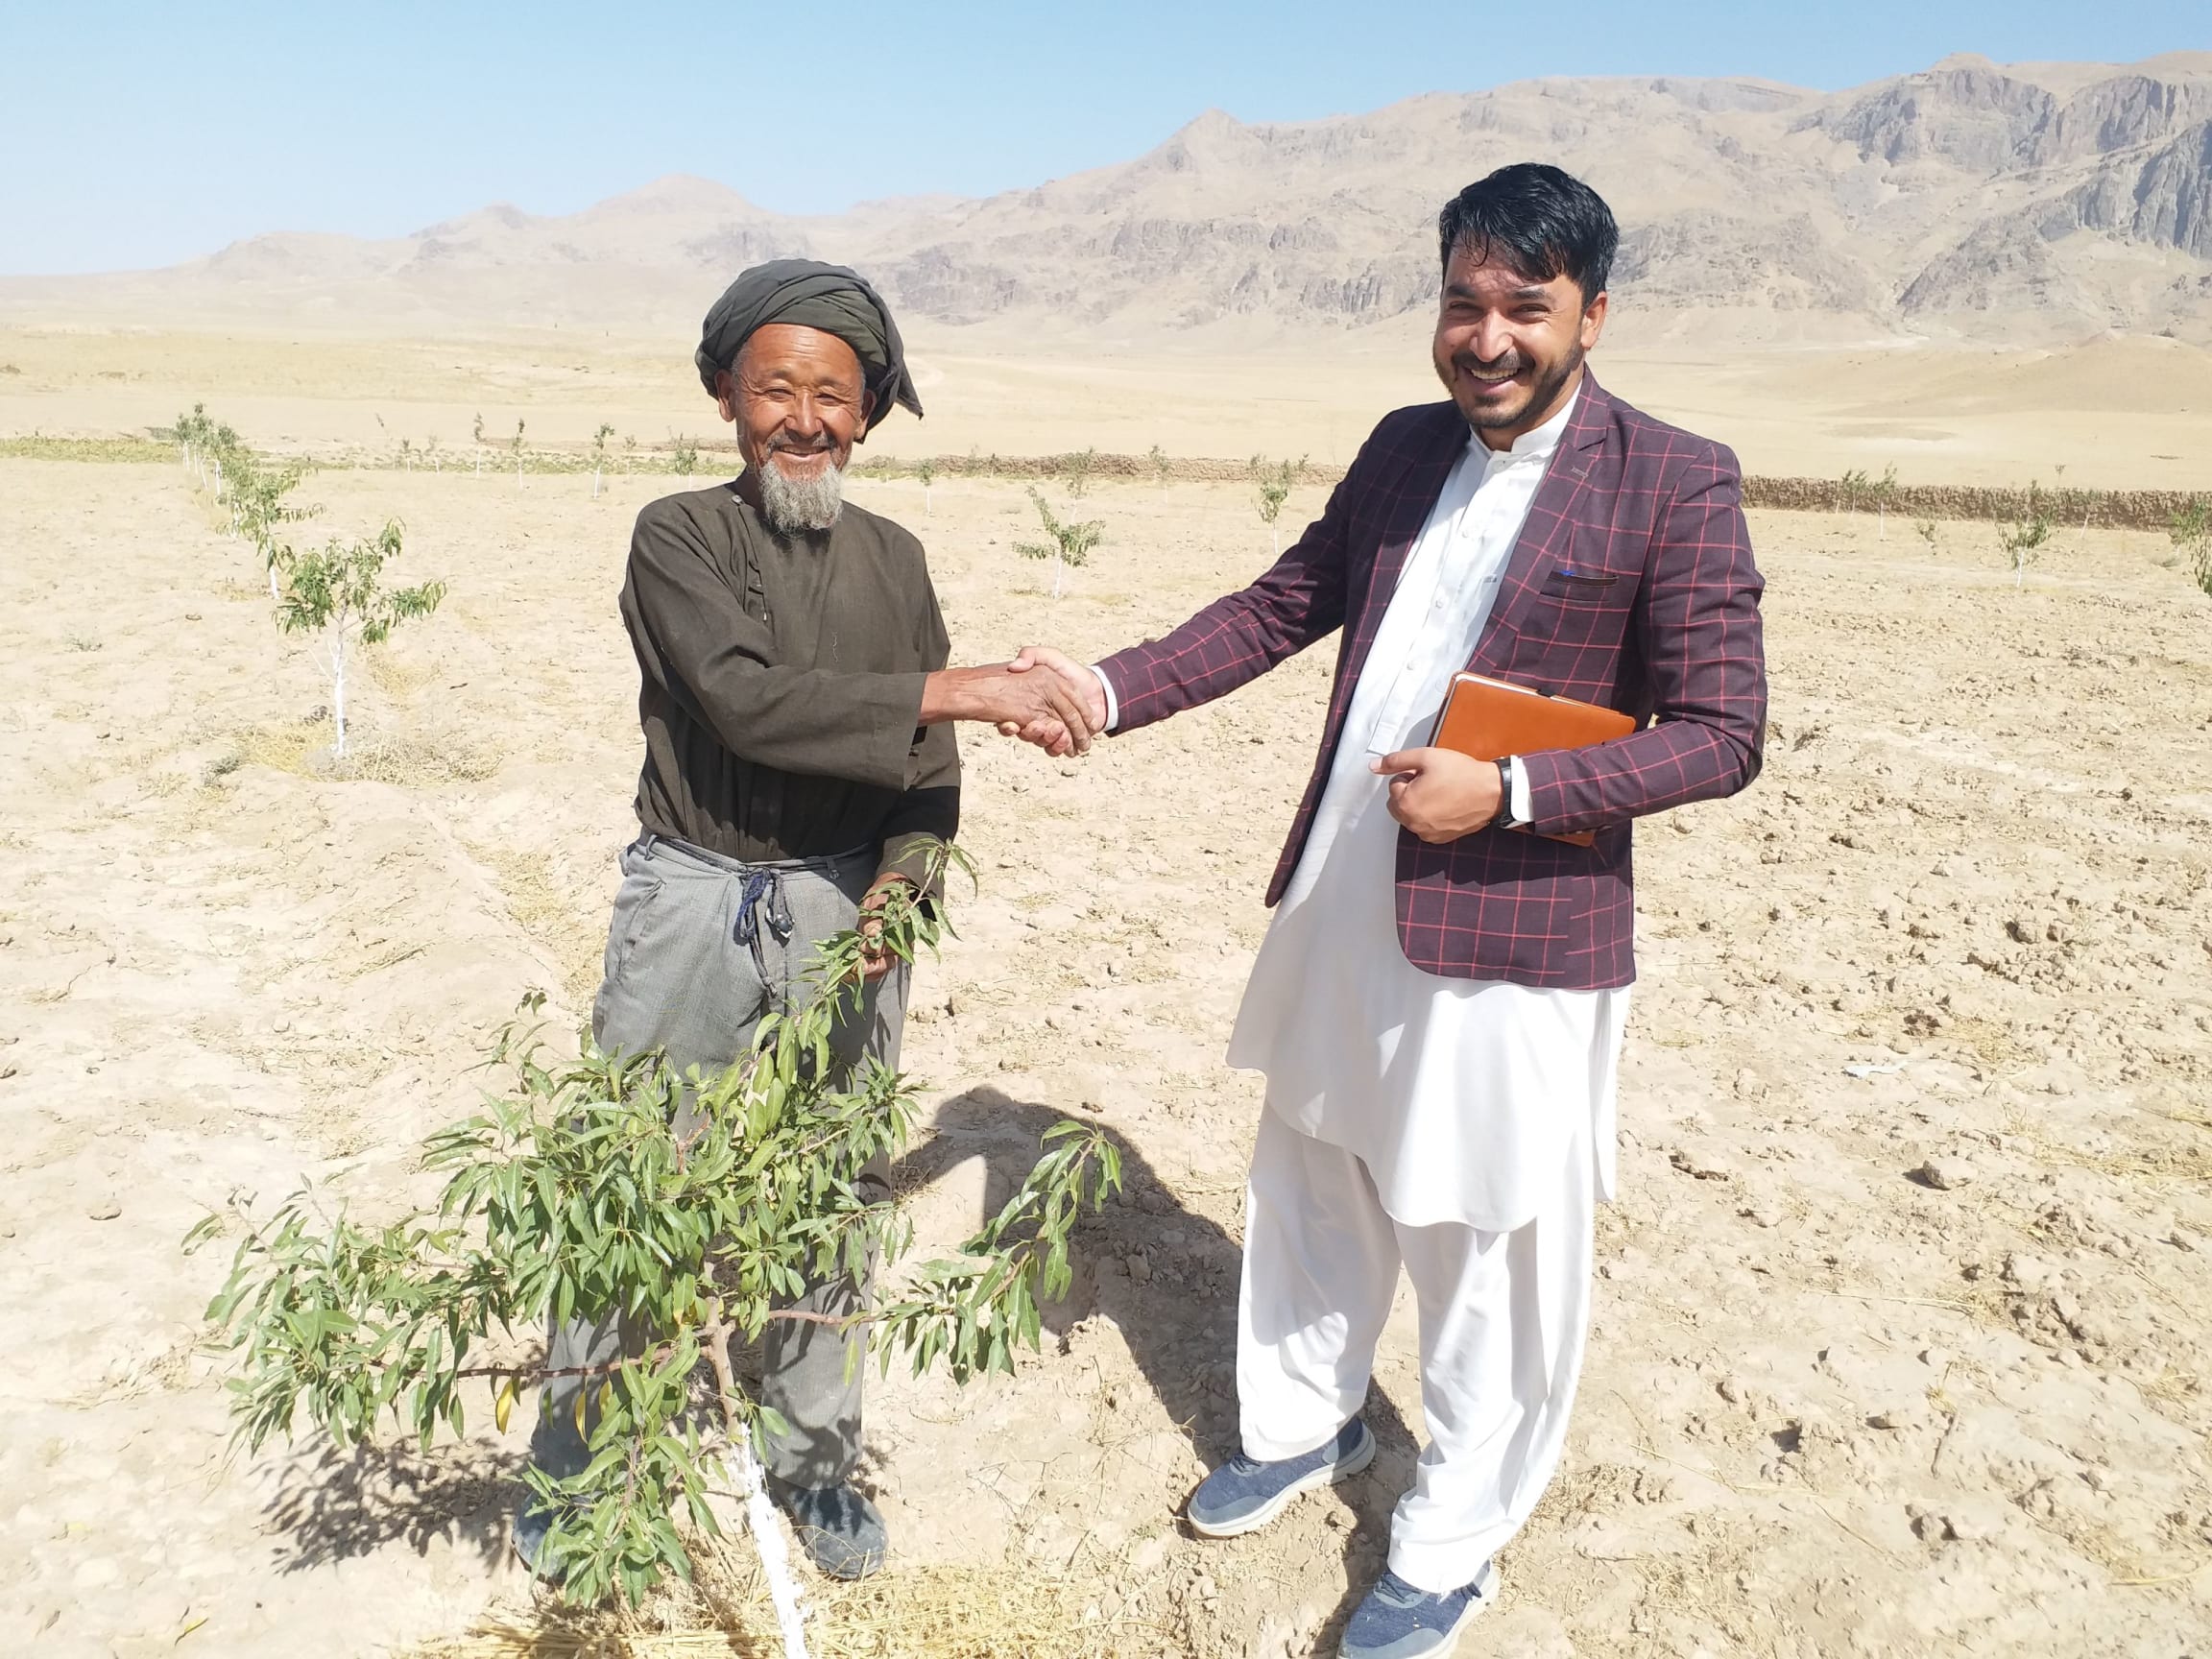 Image description: Stood on dusty sand-coloured earth in Samangan against the backdrop of rocky mountains and a sliver of faint blue sky above them are 2 men shaking hands. The one on the left is wearing a black turban and long-sleeved top and grey-b